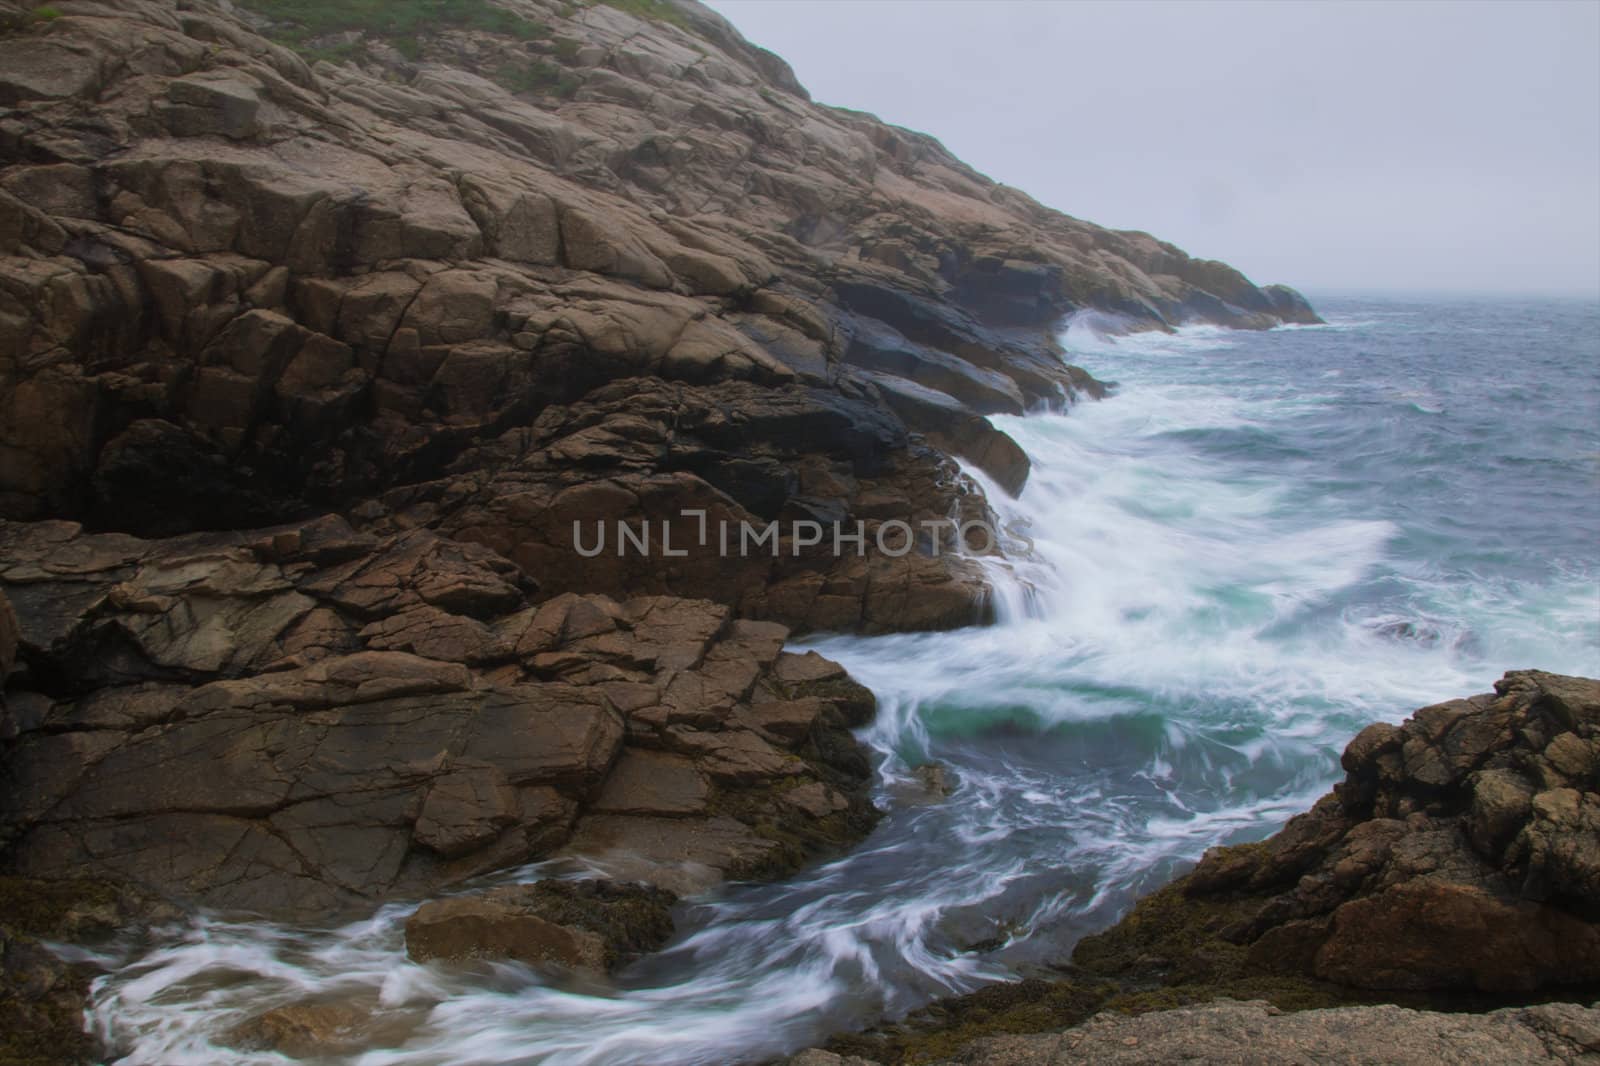 A wave rushes in among the rocks at Chebucto Head, Nova Scotia.